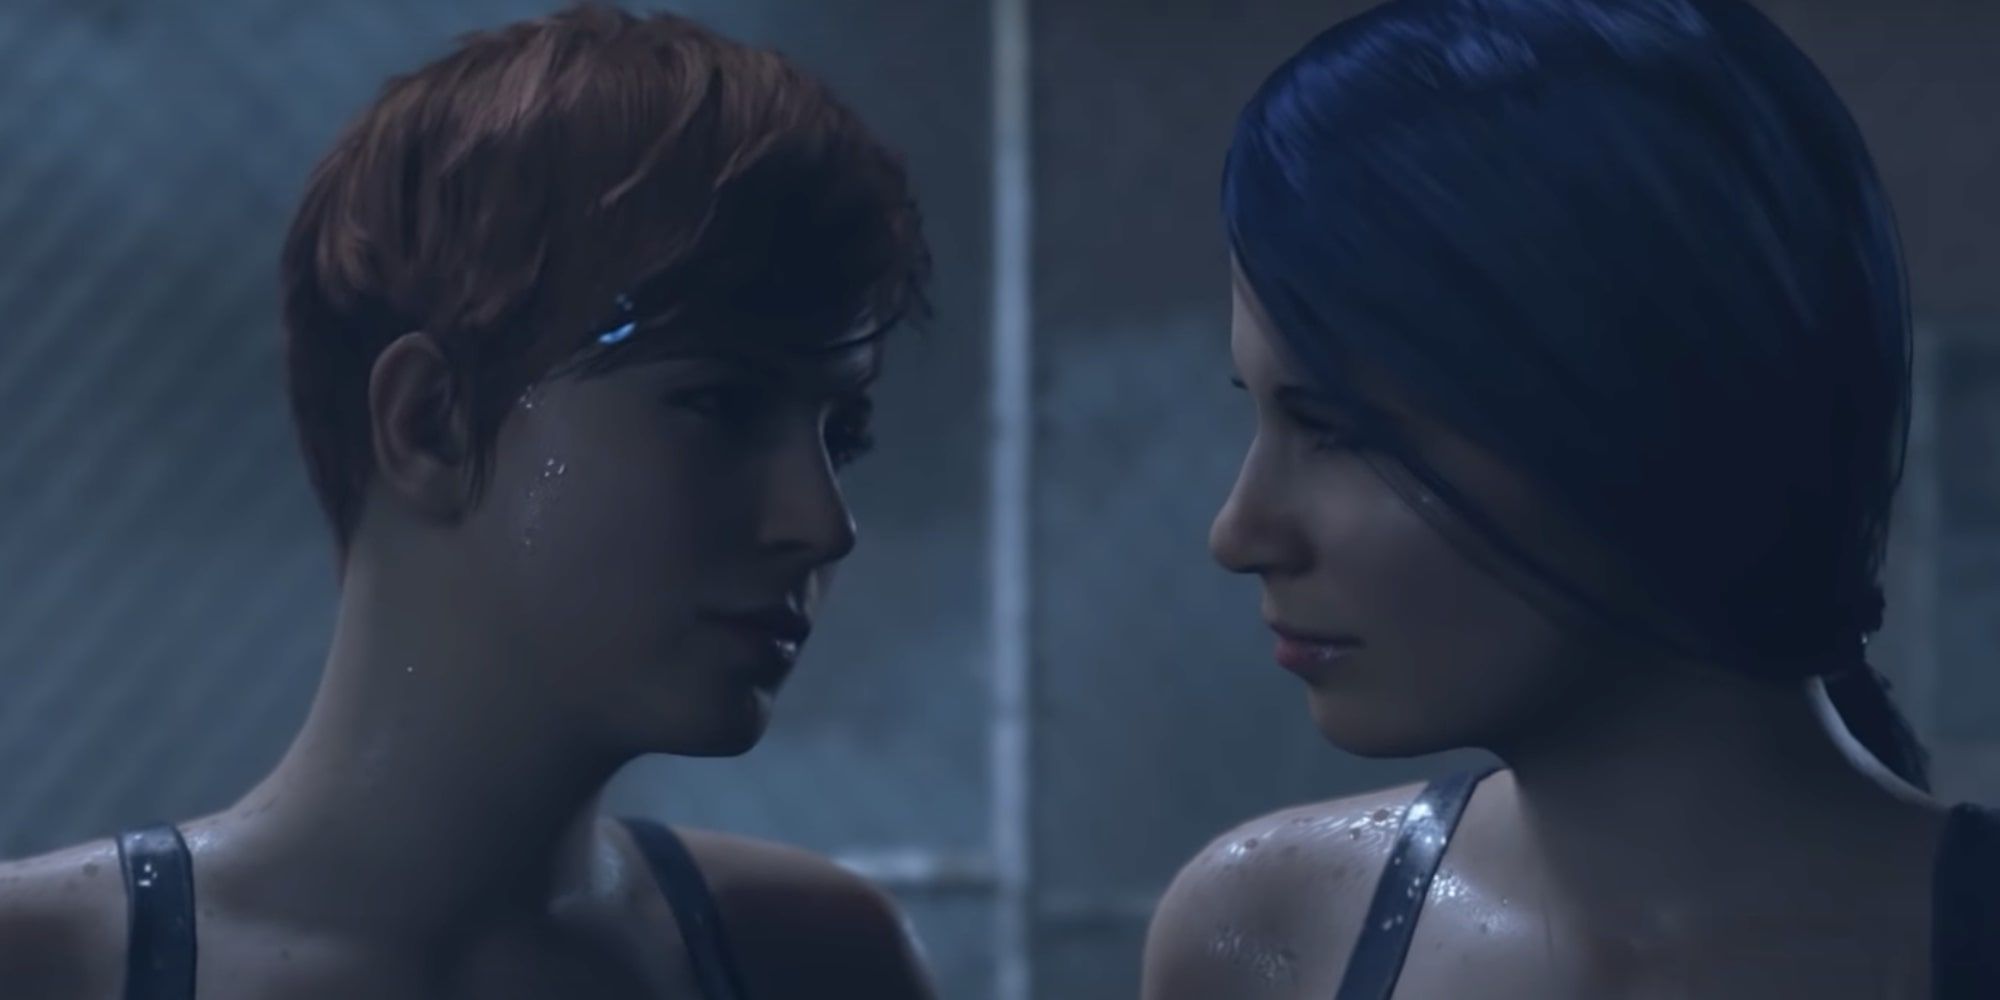 Detroit Become Human The two Tracis show they are lovers